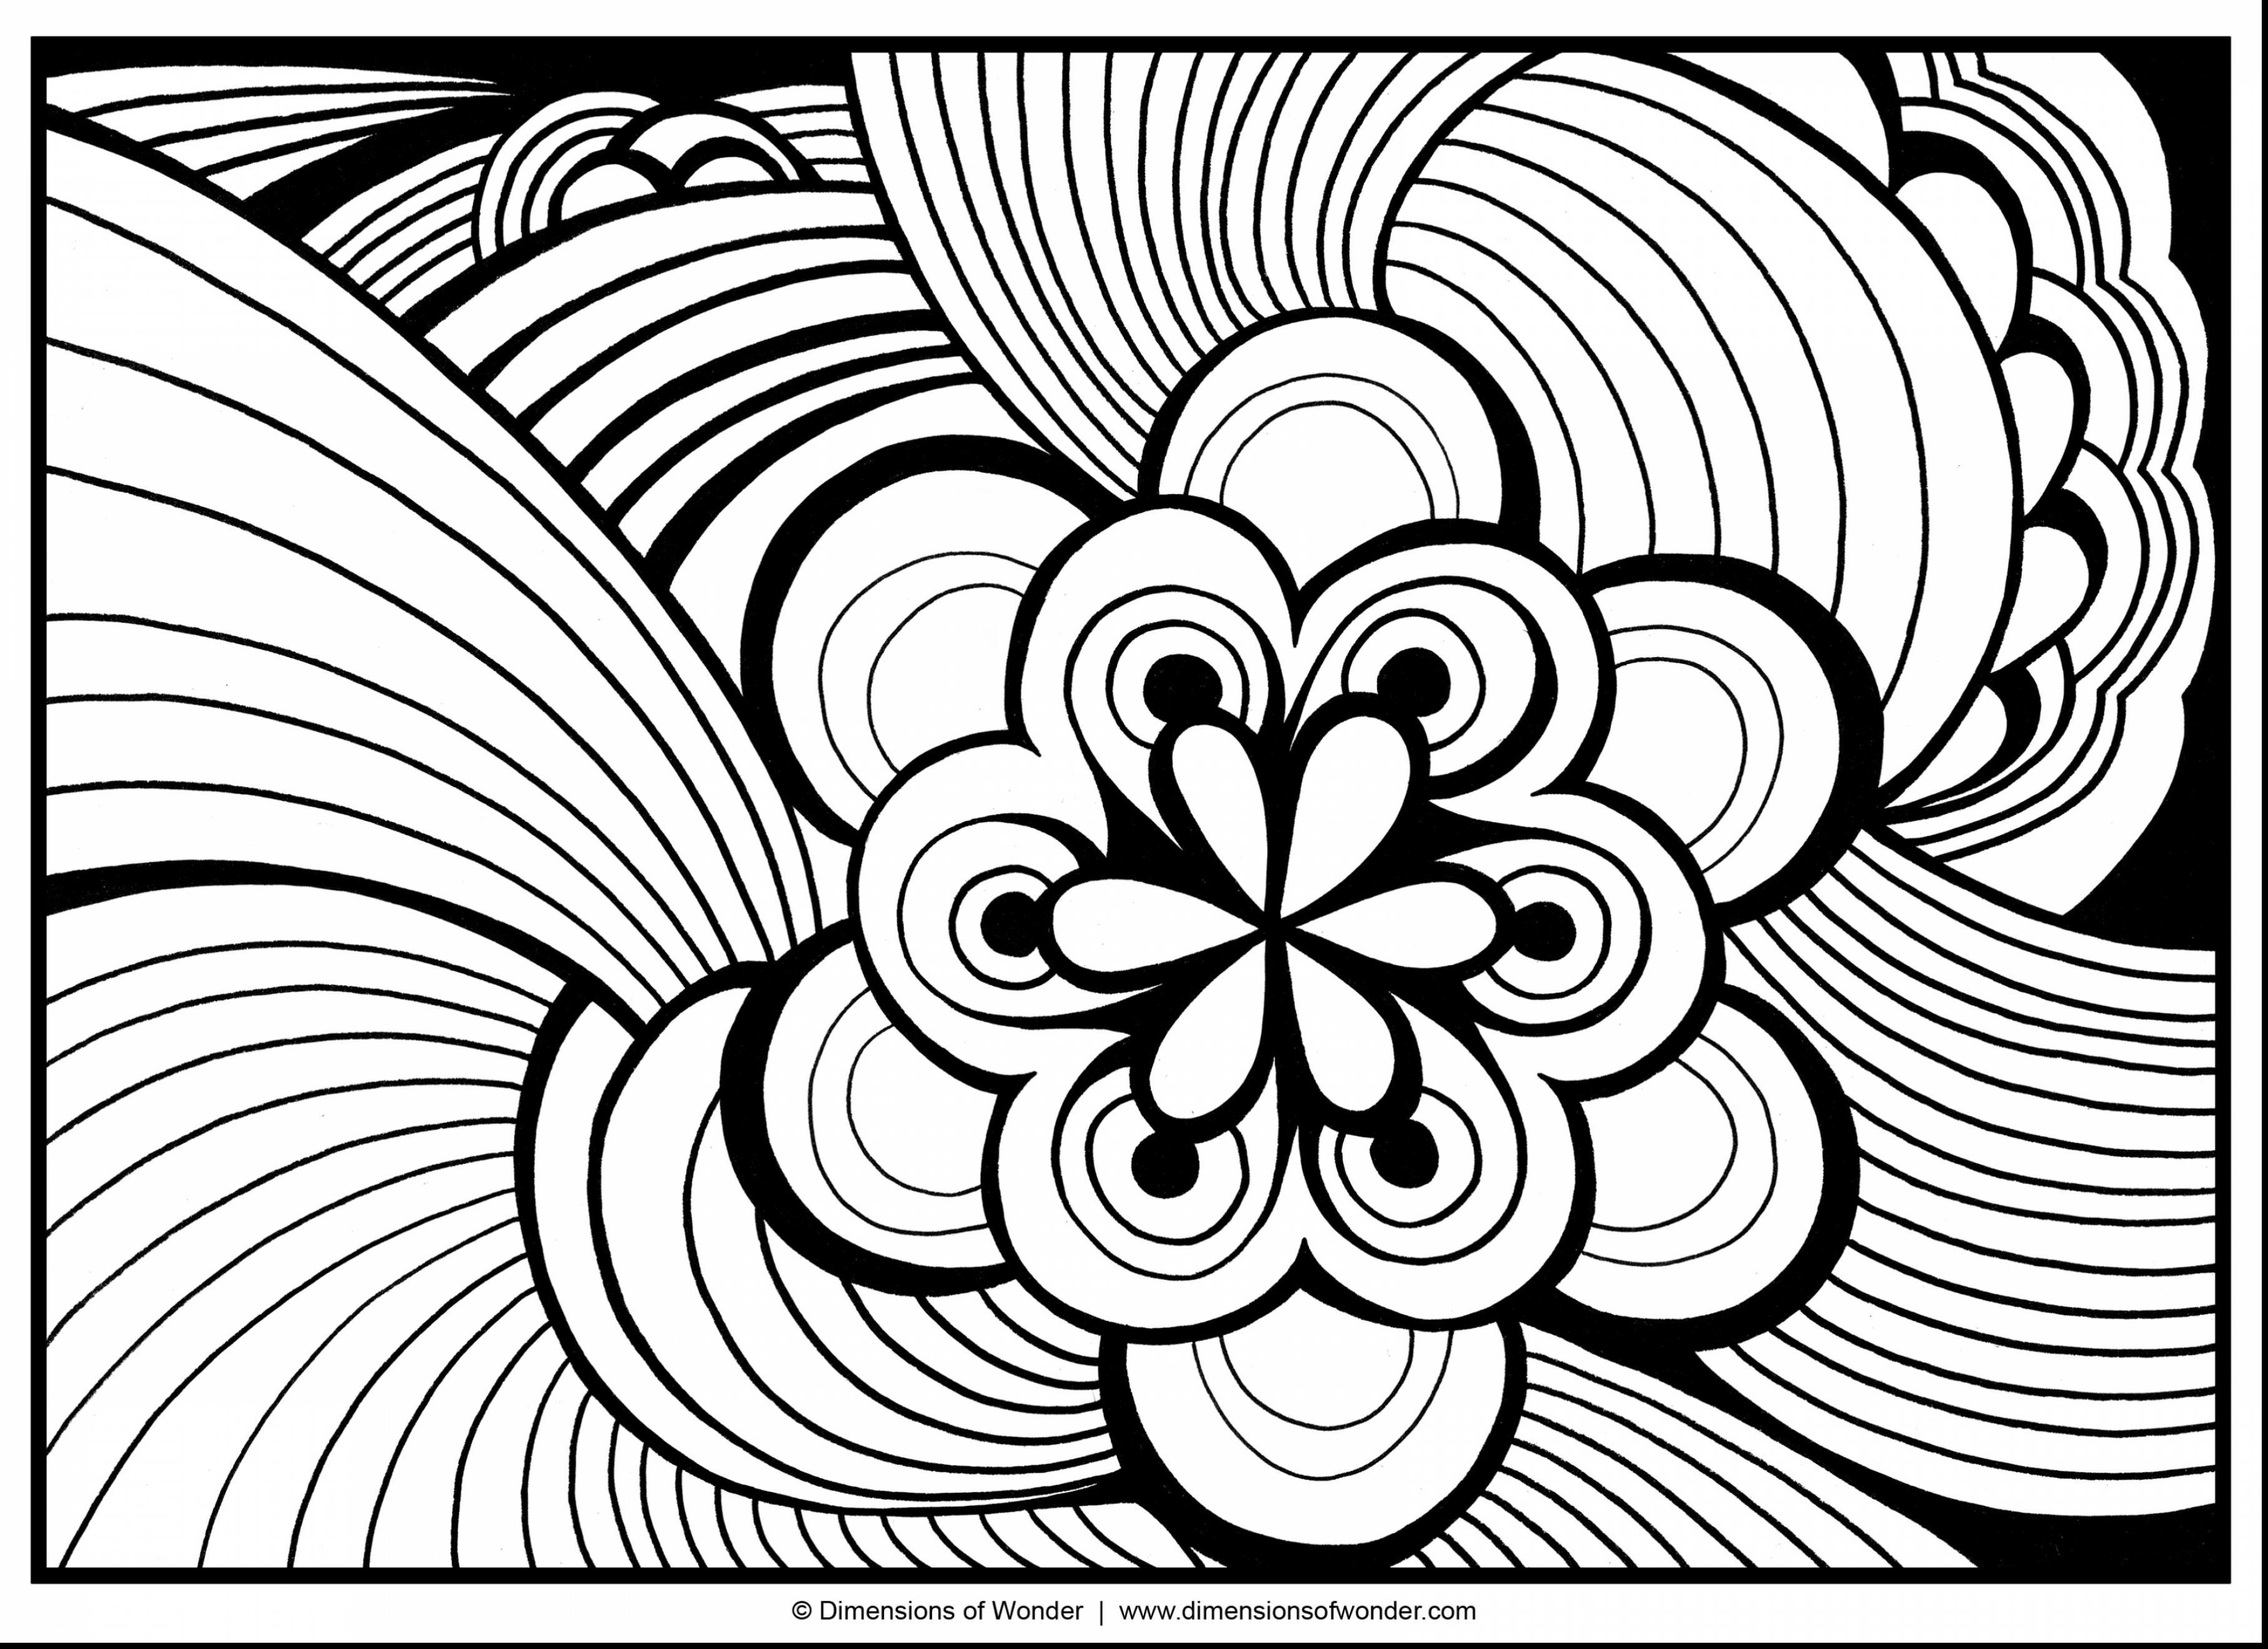 Abstract Adult Coloring Wallpapers   Top Free Abstract Adult ...